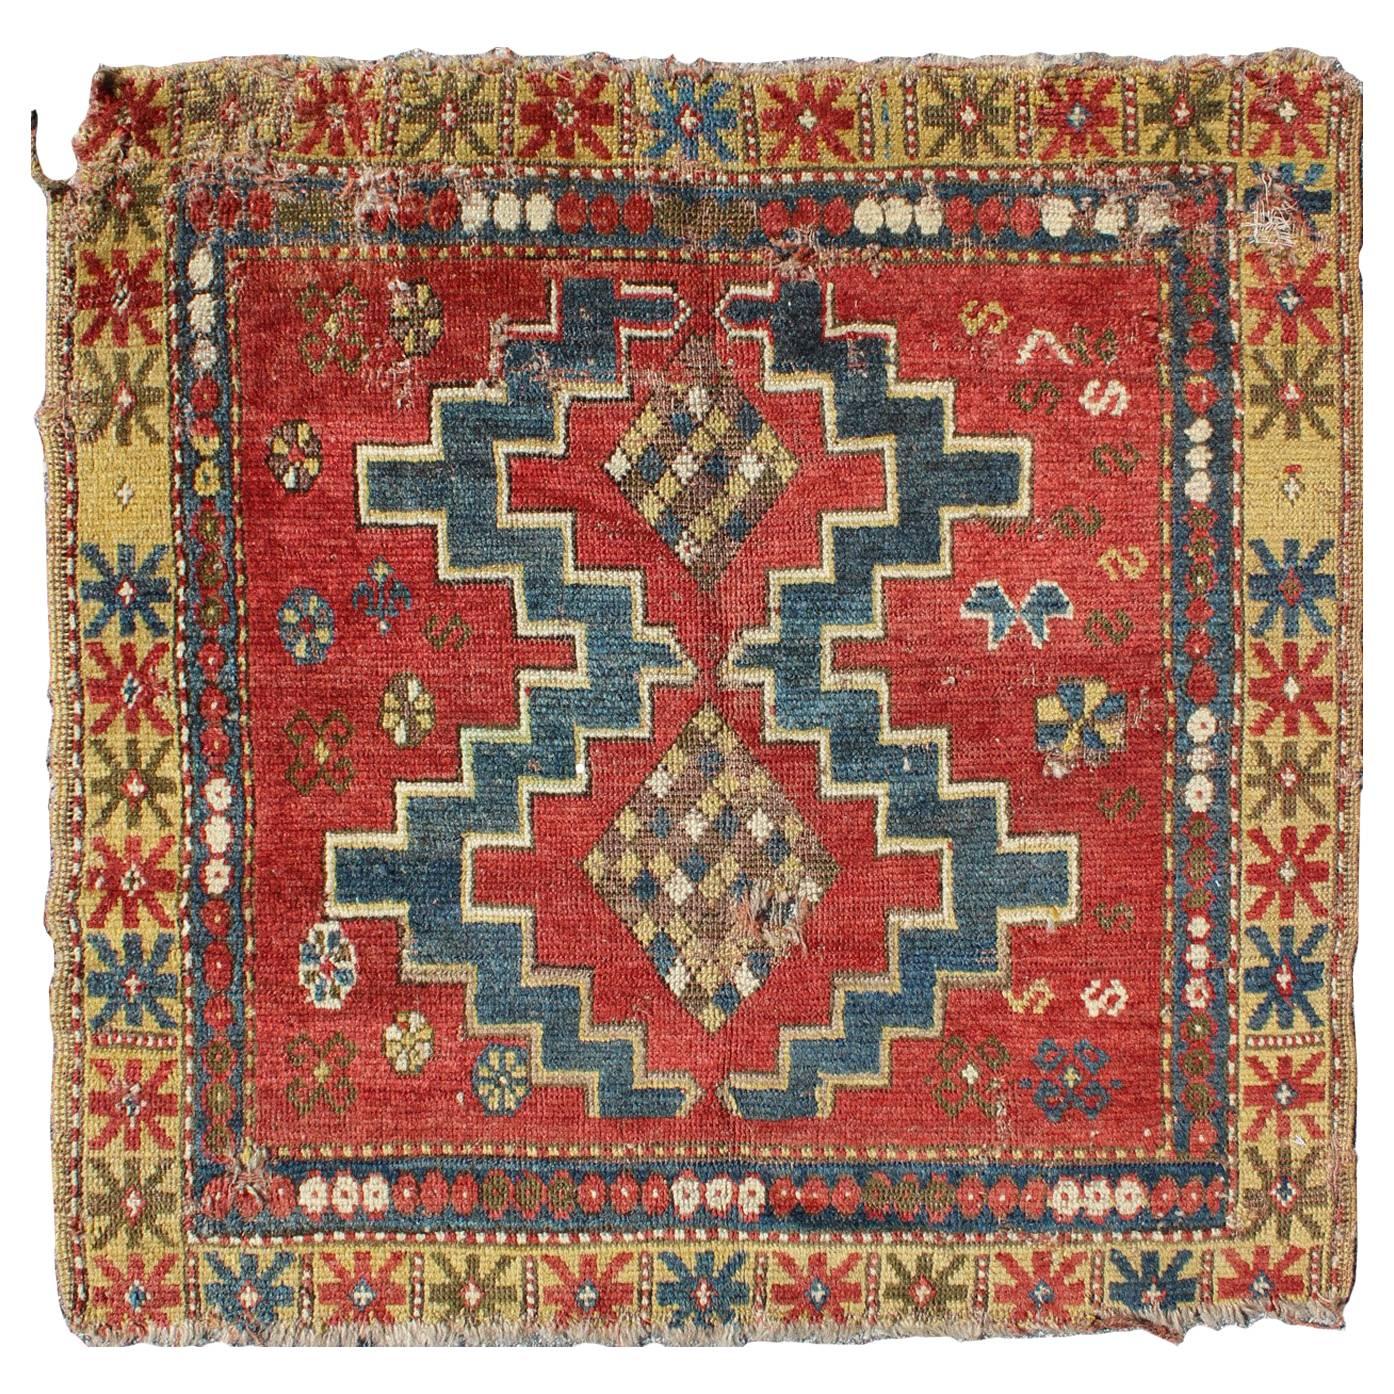 Square-Shaped Antique Caucasian Rug with Dual Medallions and Tribal Motifs